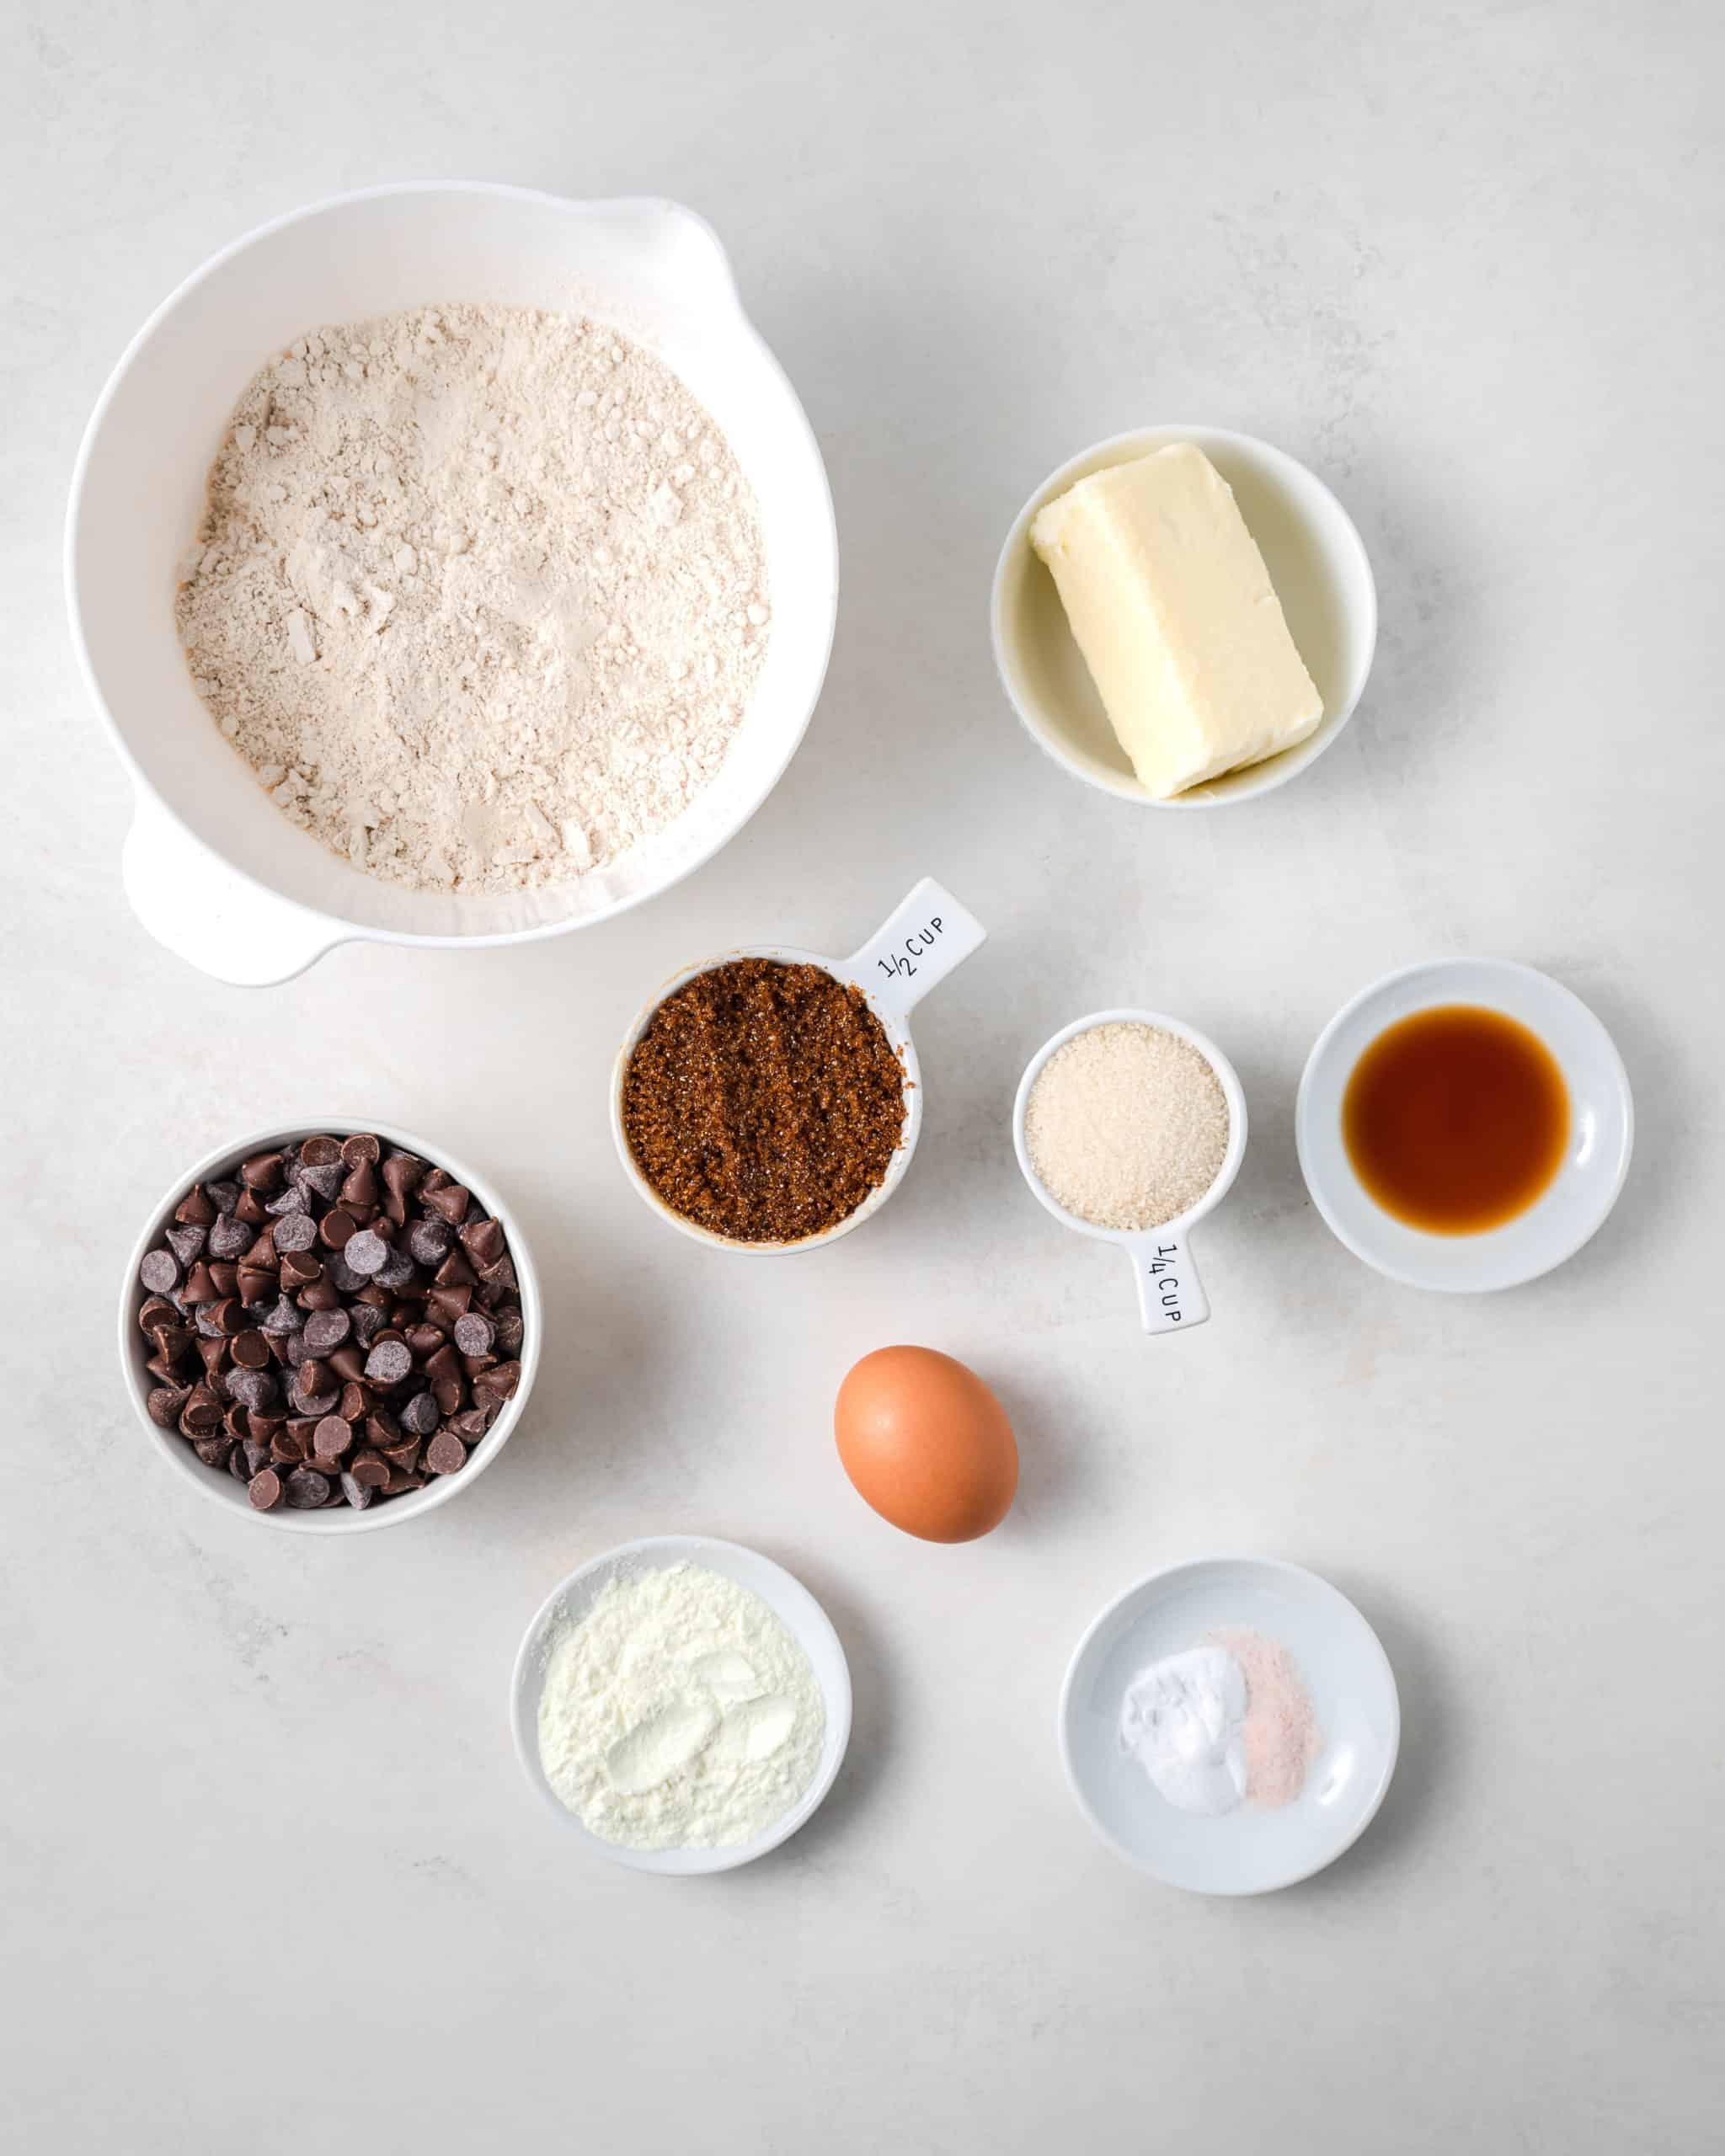 Oat Flour Chocolate Chip Cookie Ingredients.